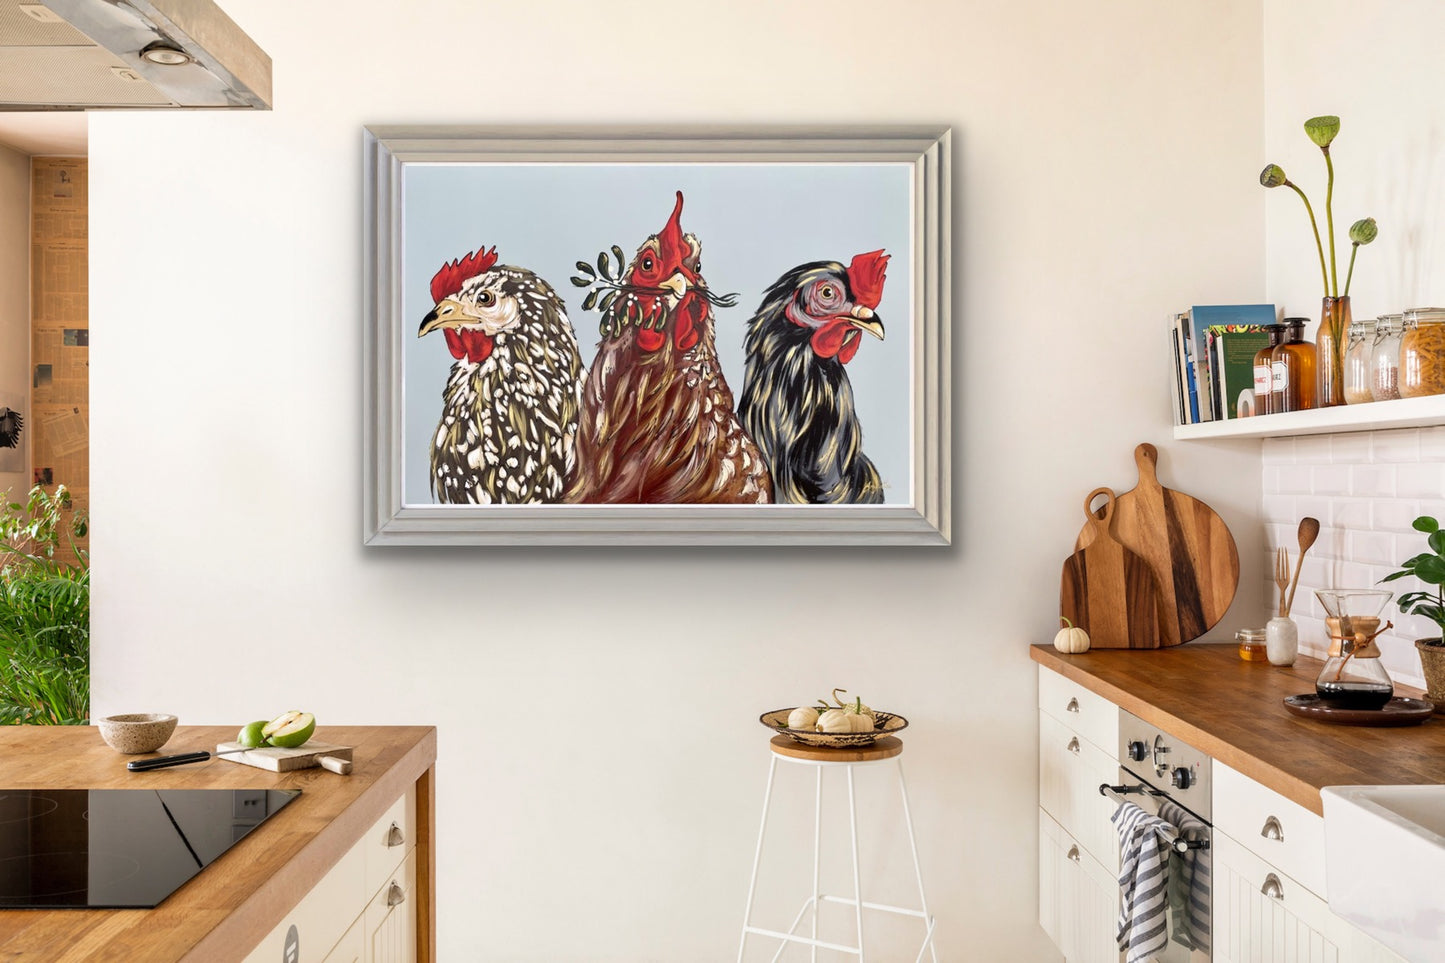 Three French Hens ORIGINAL by Amy Louise NEW